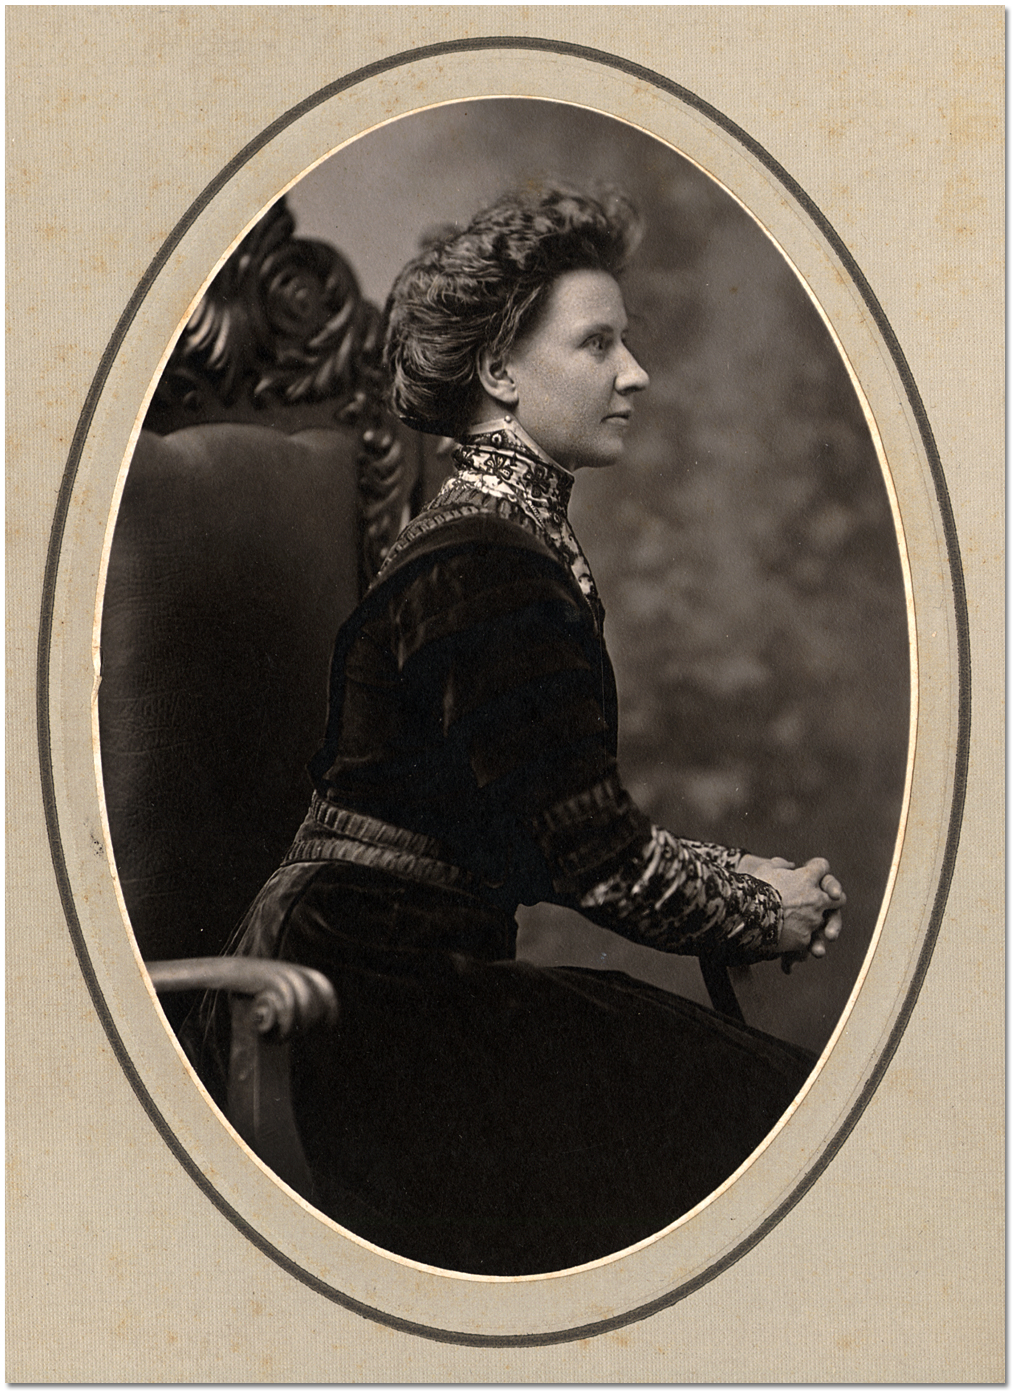 Portrait of an unidentified woman seated in a chair, [between 1900 and 1920]